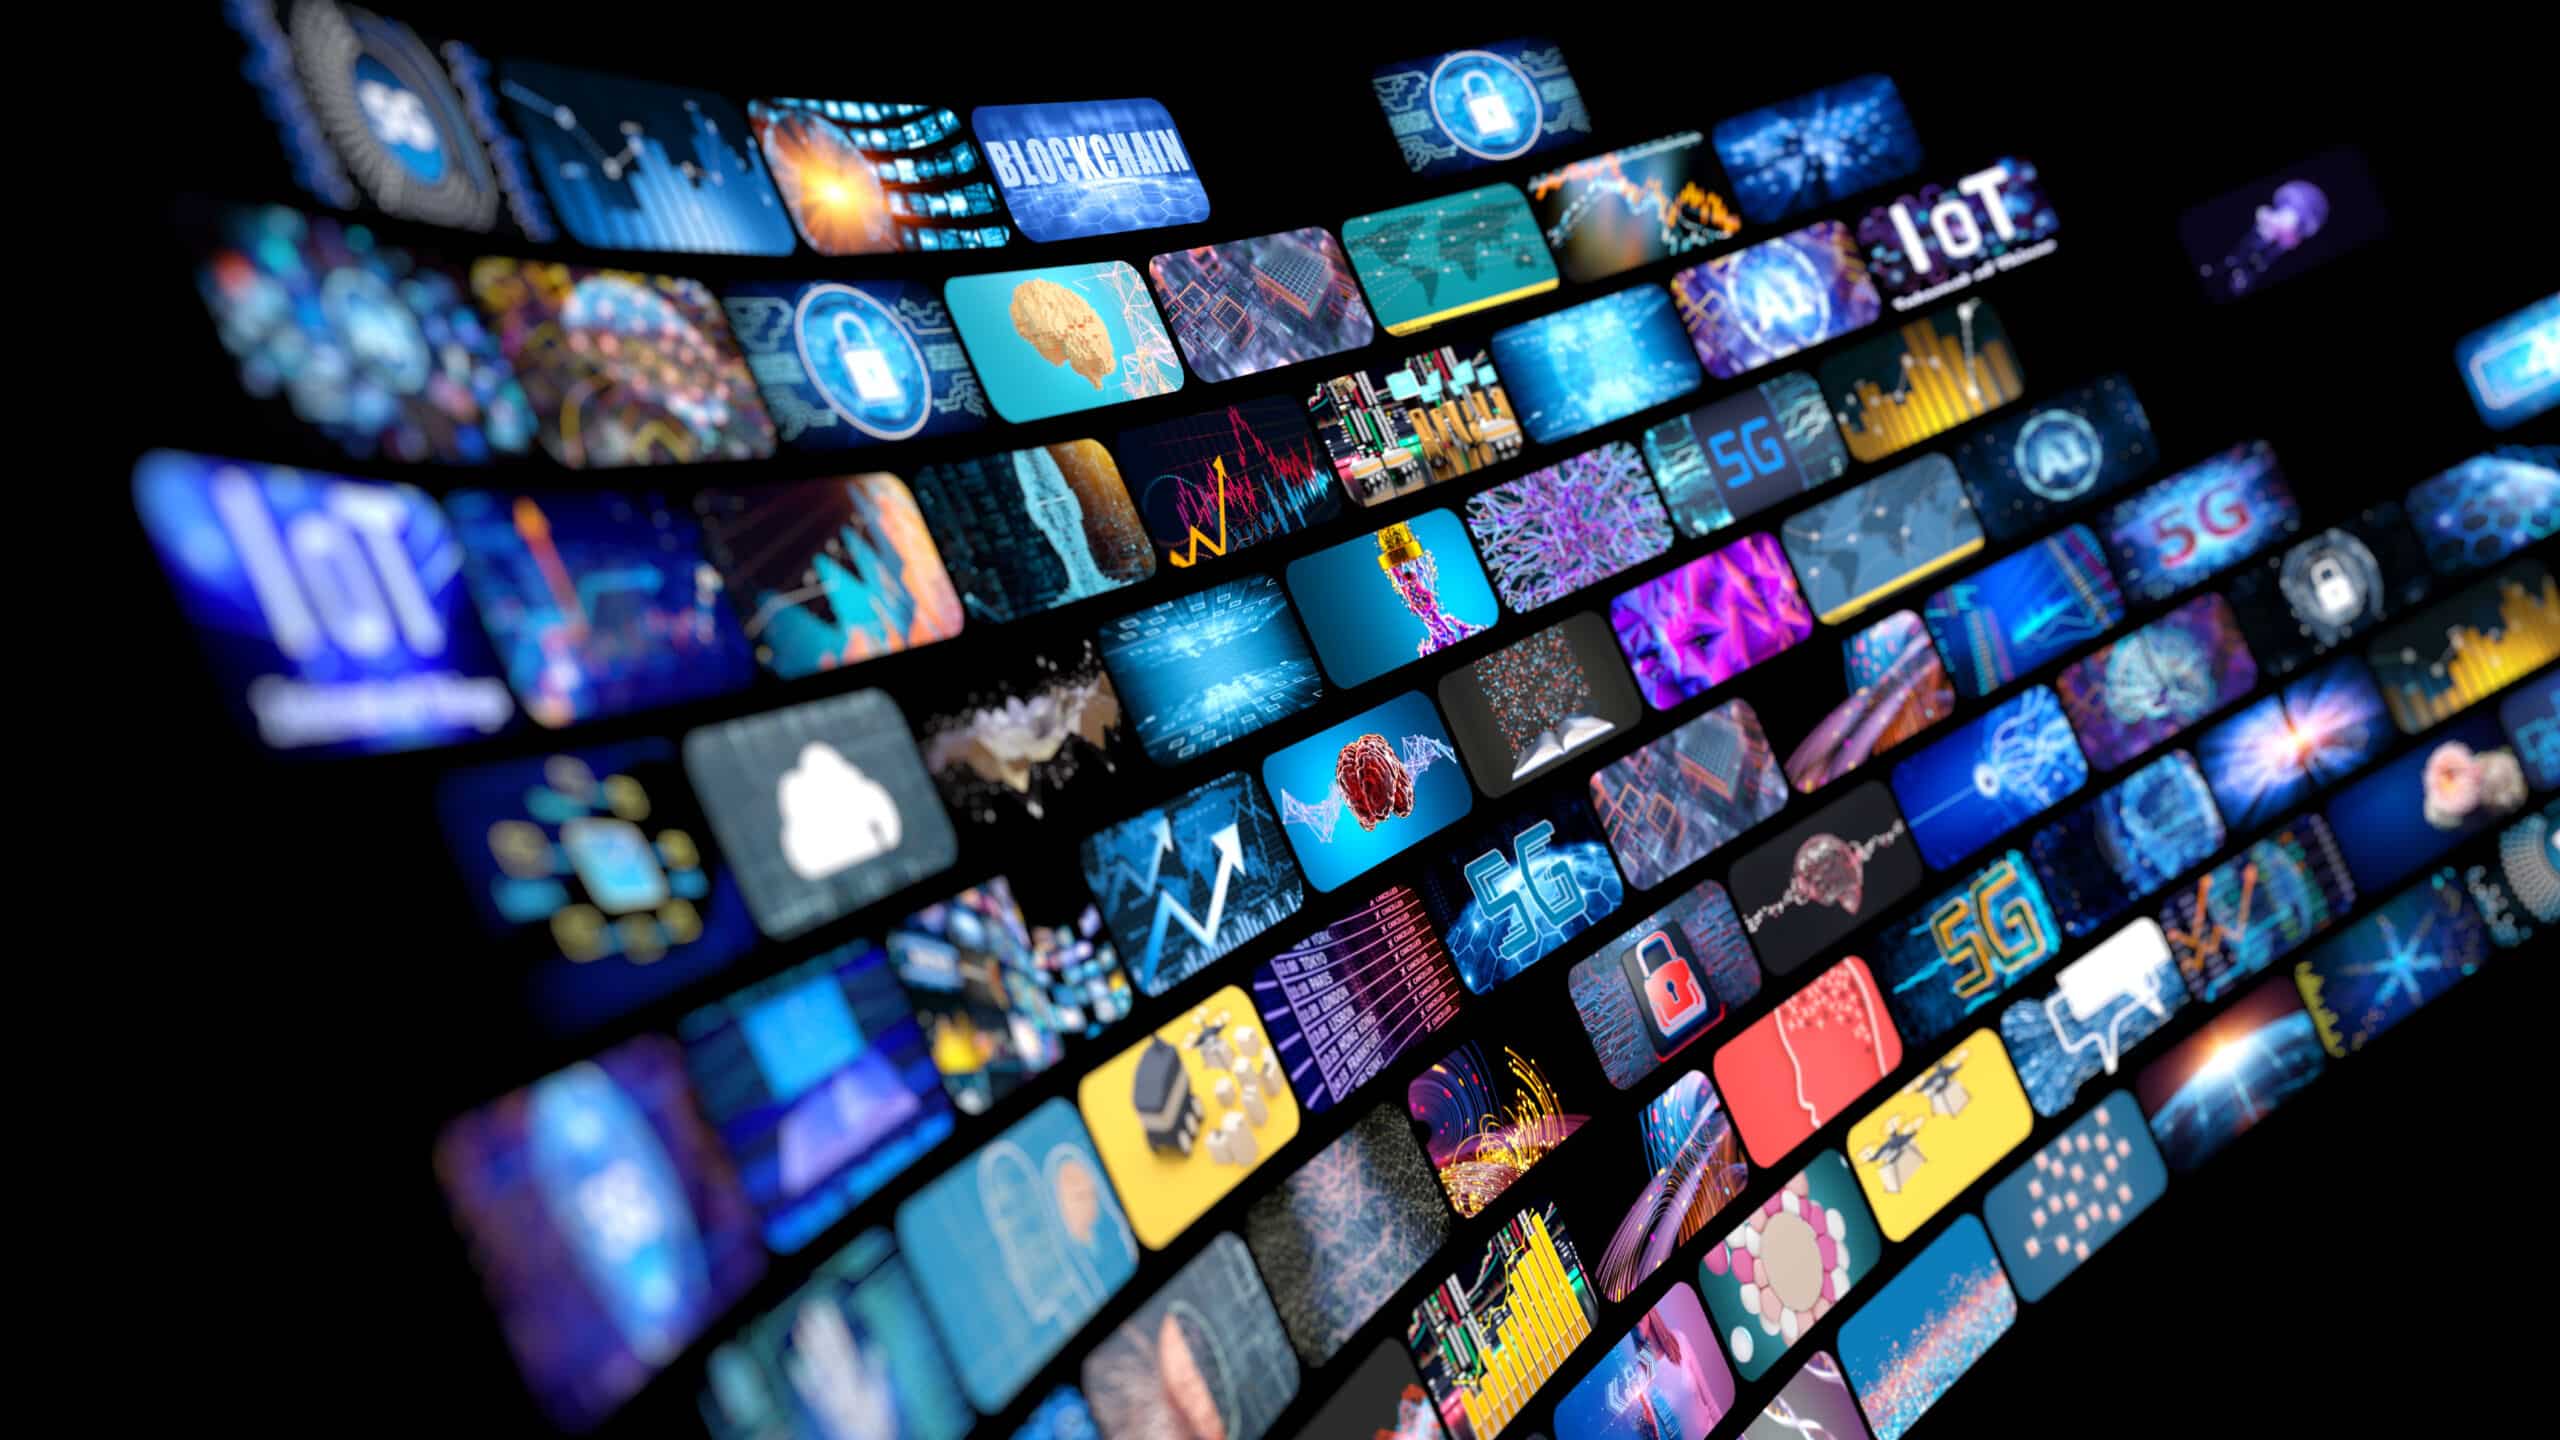 What to Know About the Premium TV Advertising Ecosystem